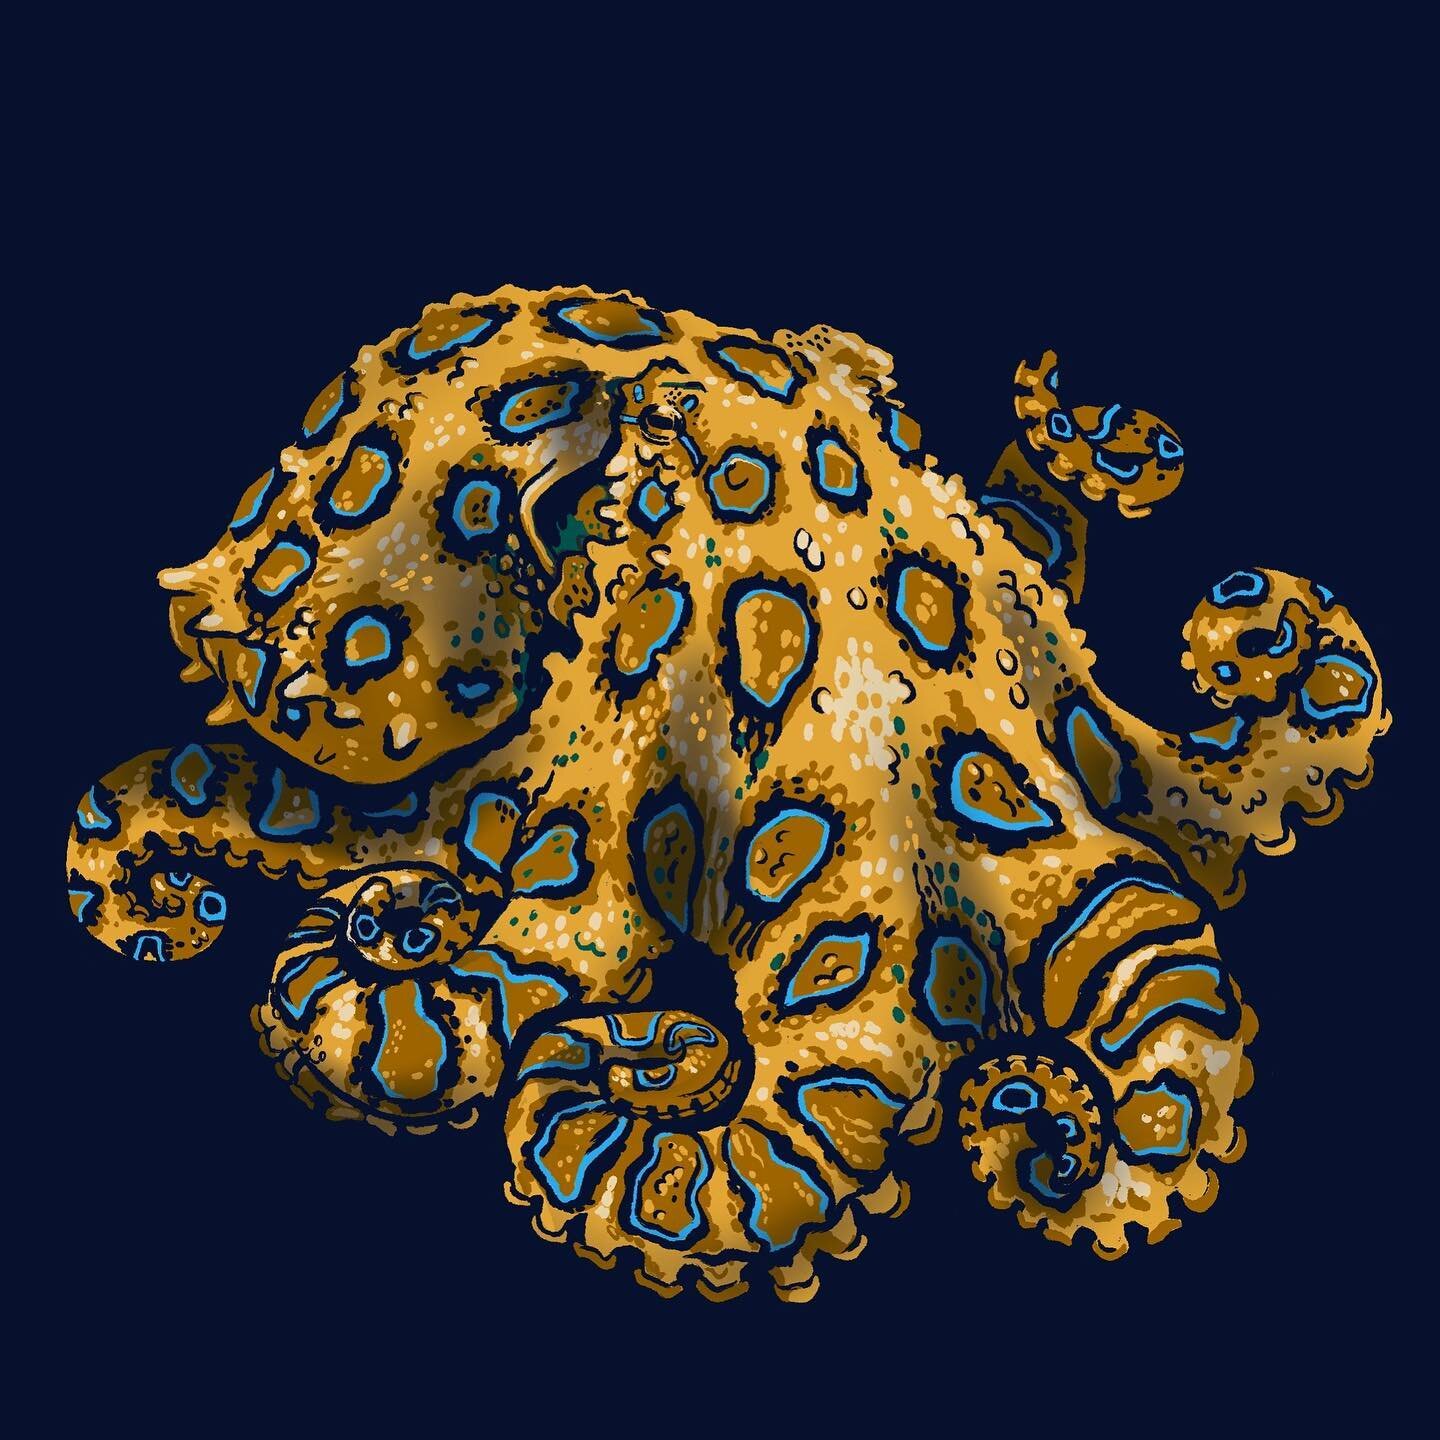 Greater Blue-Ringed Octopus - Hapalochlaena lunulata 
&bull;
This tiny octopus is considered one of the most venomous sea creatures! There is no anti-venom. 
&bull;
#greaterblueringedoctopus #blueringedoctopus #hapalochlaenalunulata #hapalochlaena #c